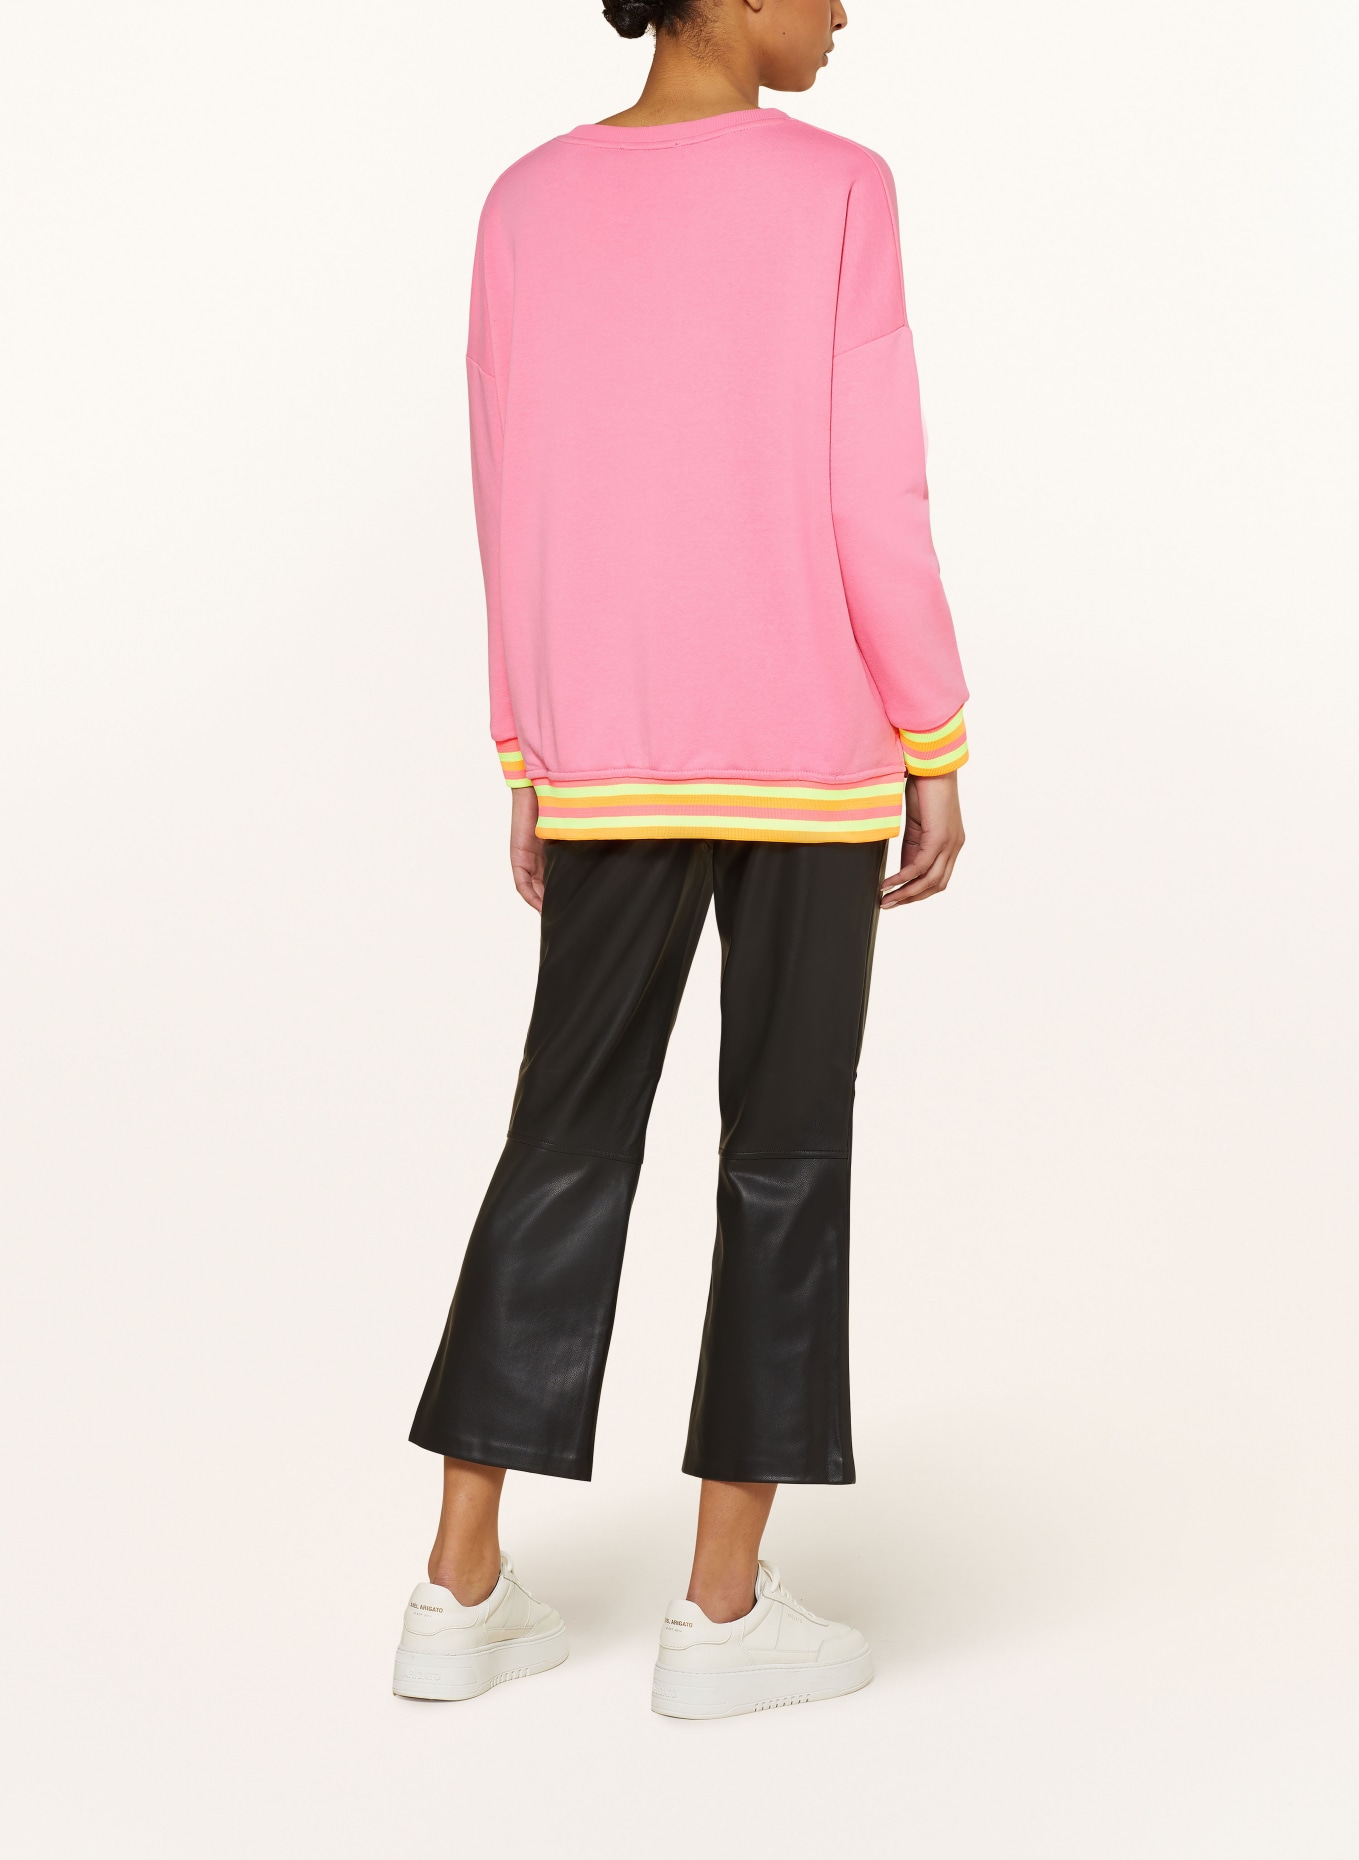 miss goodlife Sweatshirt with decorative gems, Color: PINK (Image 3)